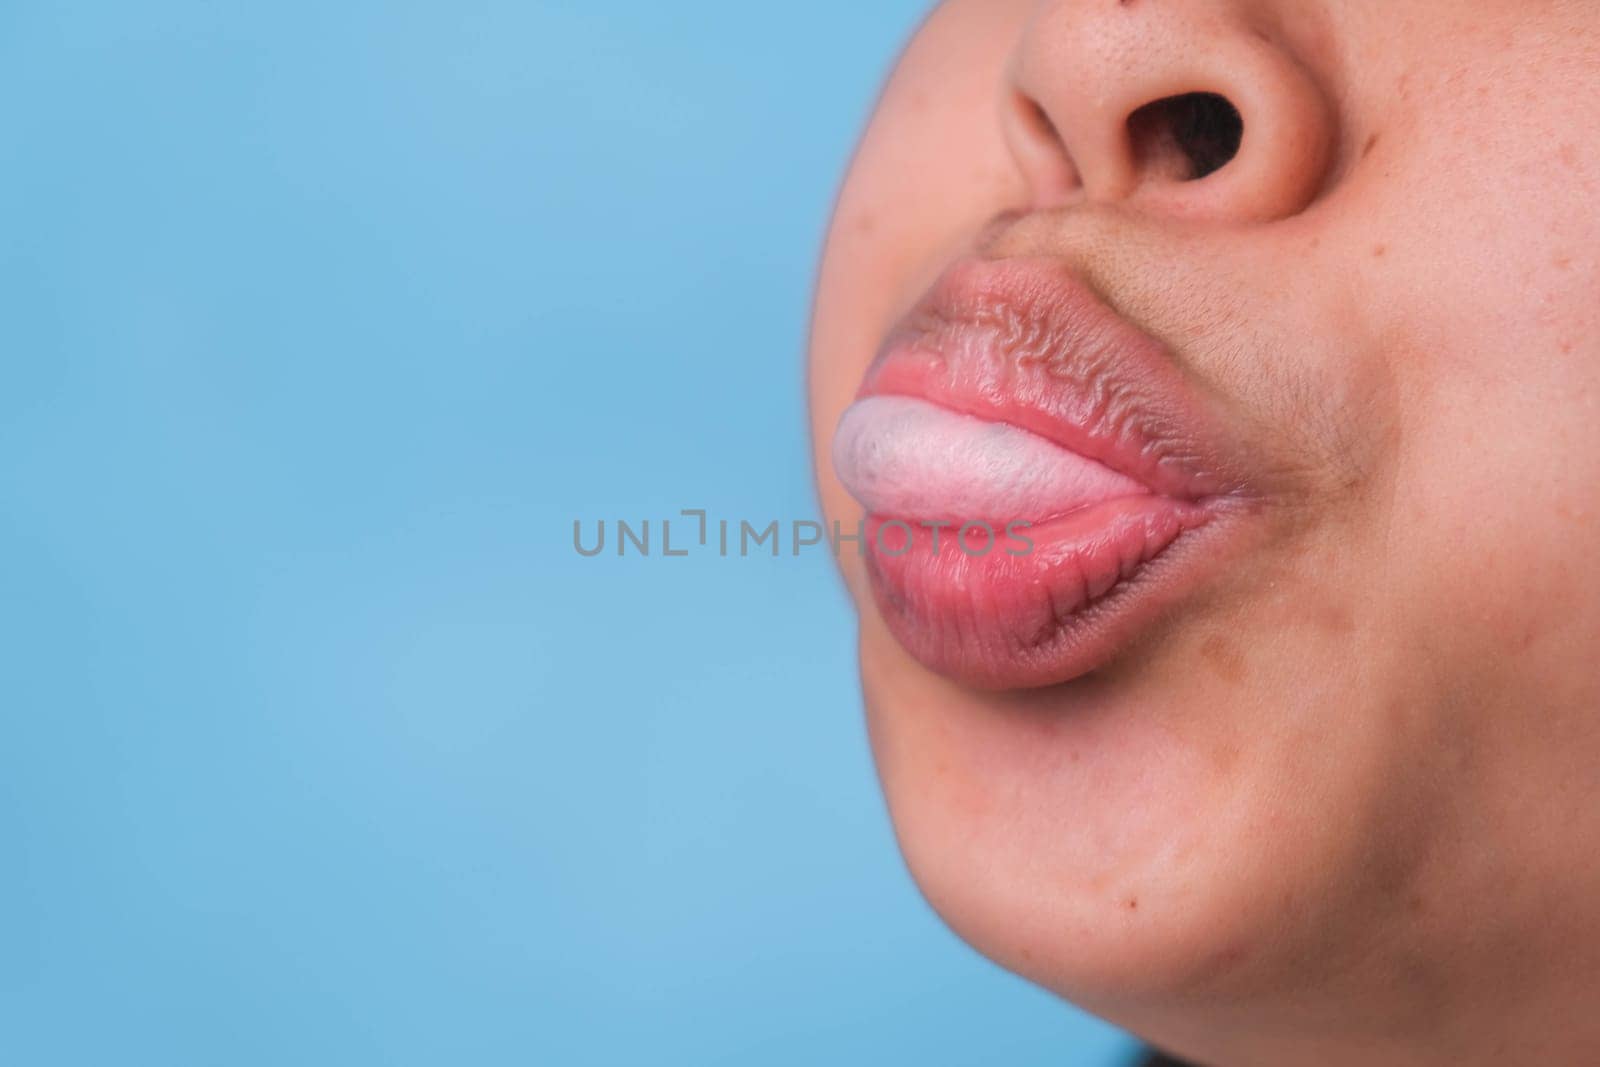 Young woman chewing gum and blowing bubble gum on blue background.